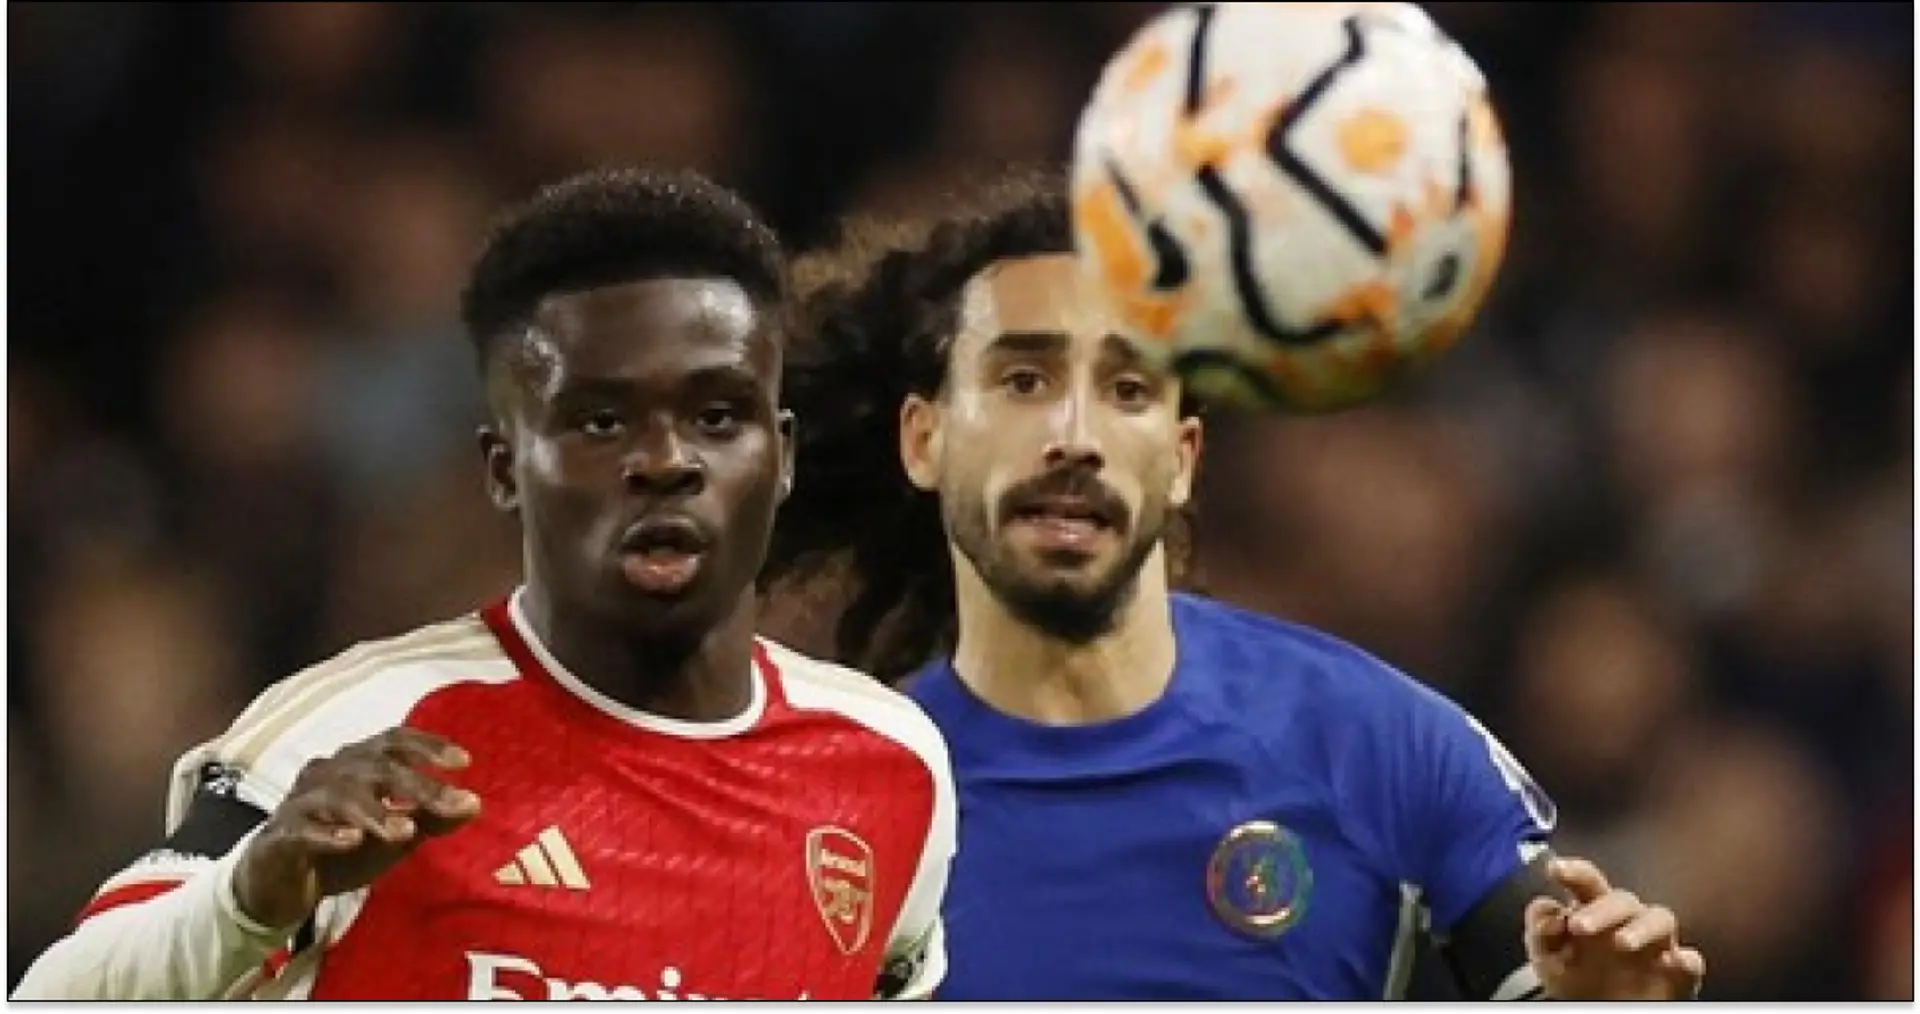 'Angry but we have things to be proud of': Cucurella reflects on Arsenal draw